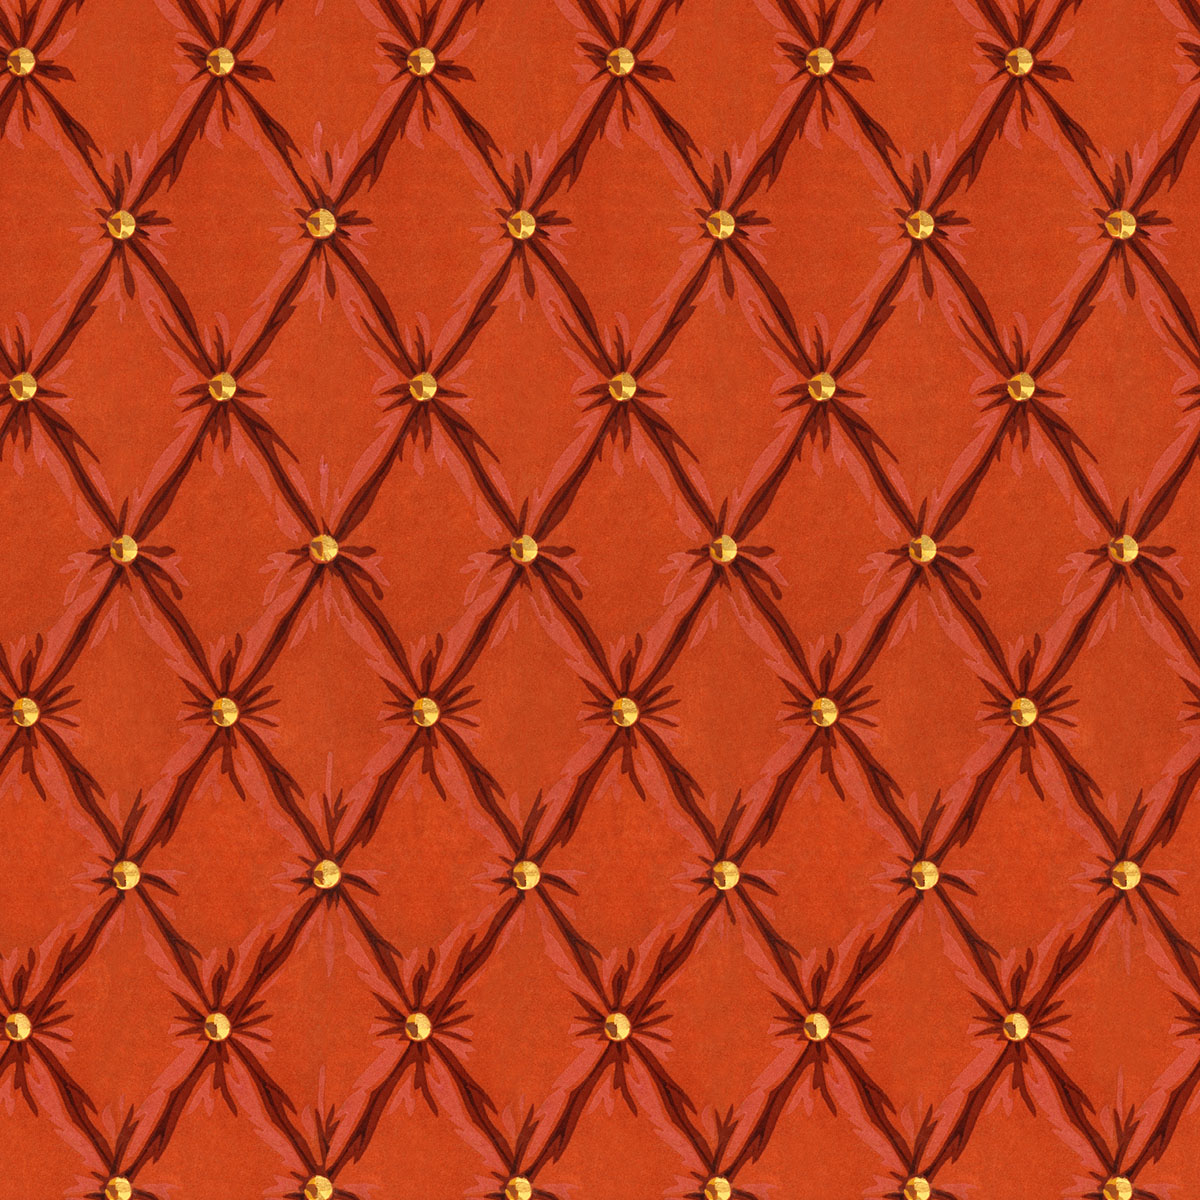 images/productimages/small/tufted-panel-mandarin-52x70cm-wp30172.jpg